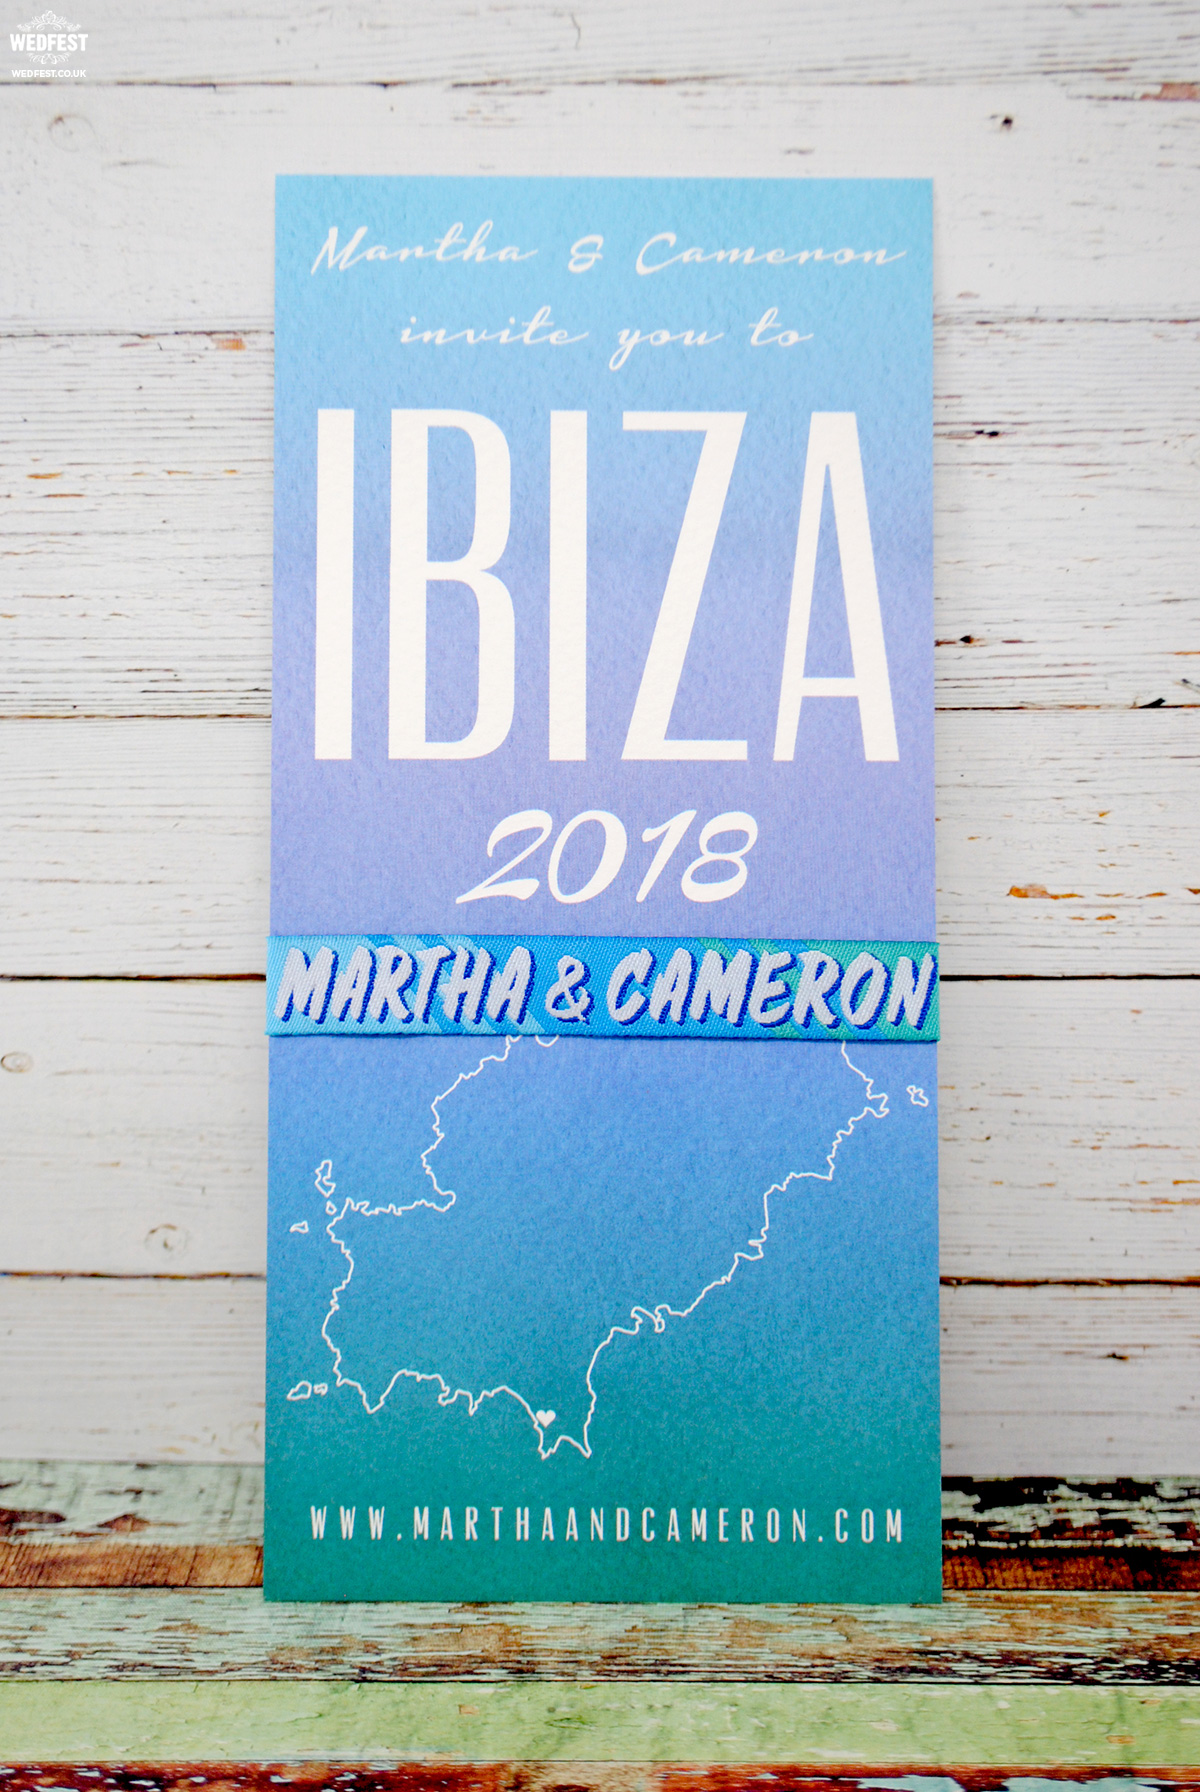 ibiza-wedding-save-the-date-cards-wristbands-wedfest